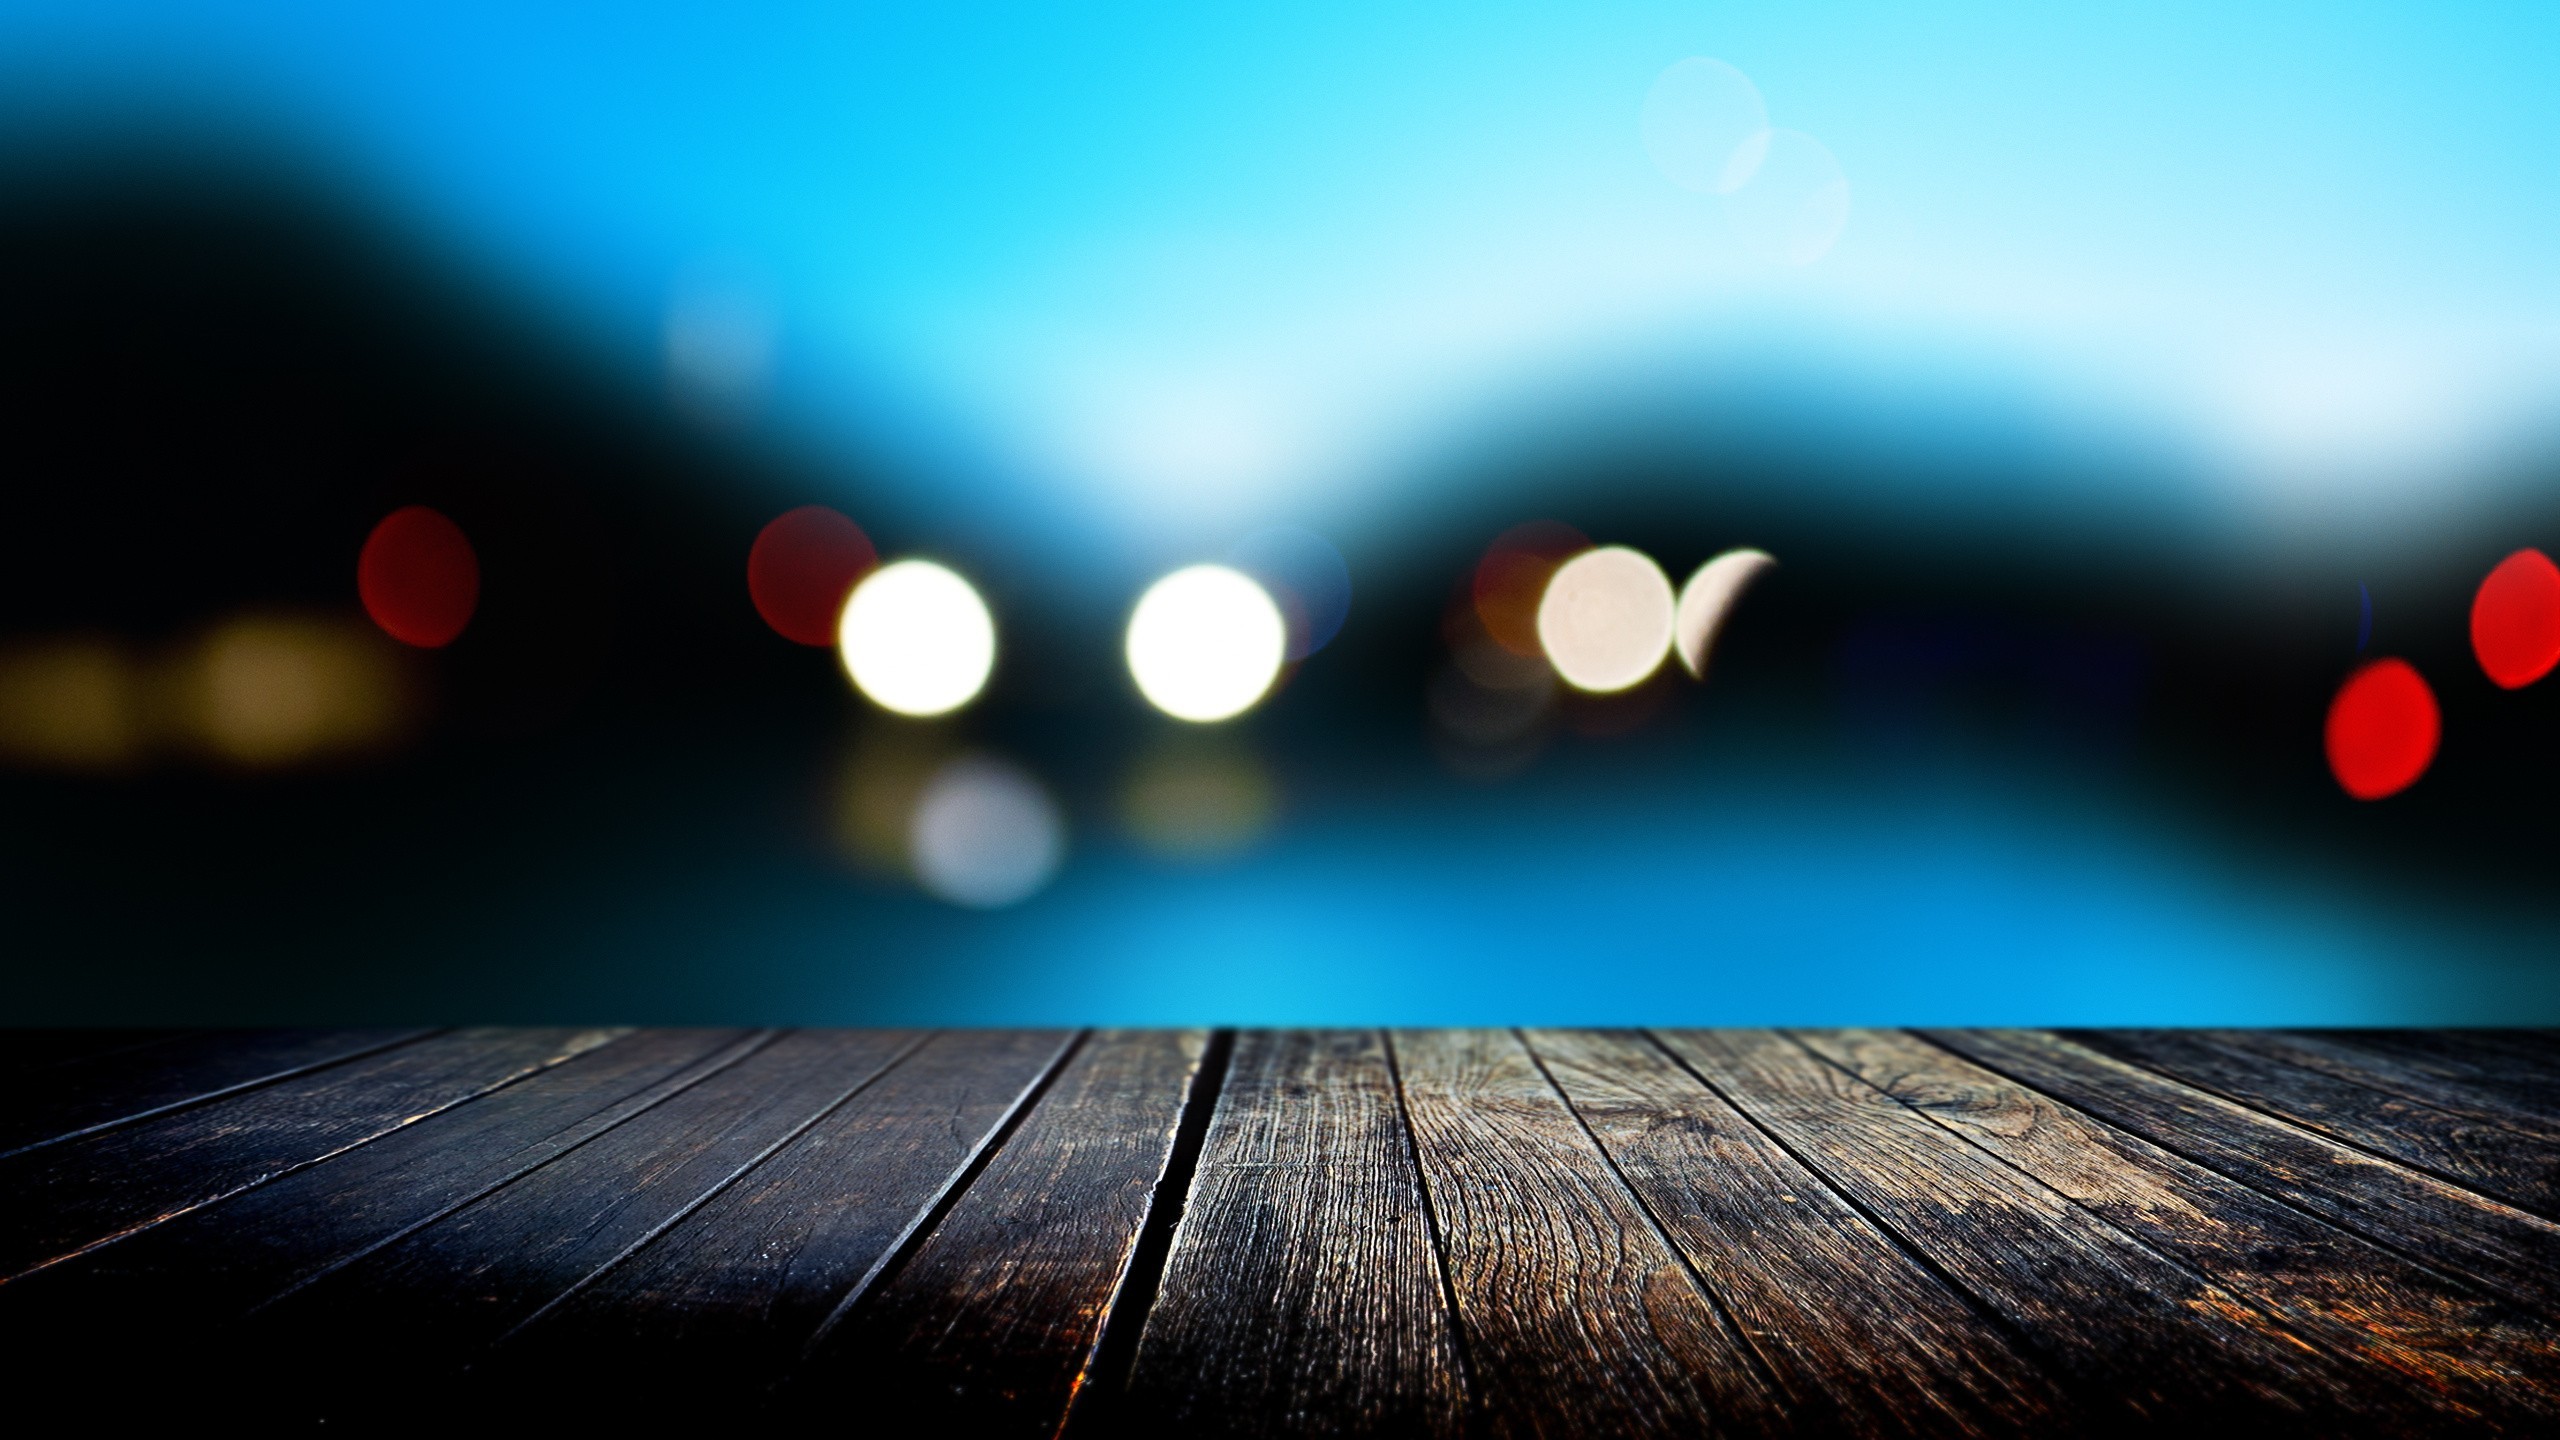 General 2560x1440 wood bokeh lights depth of field abstract blurry background blurred pier